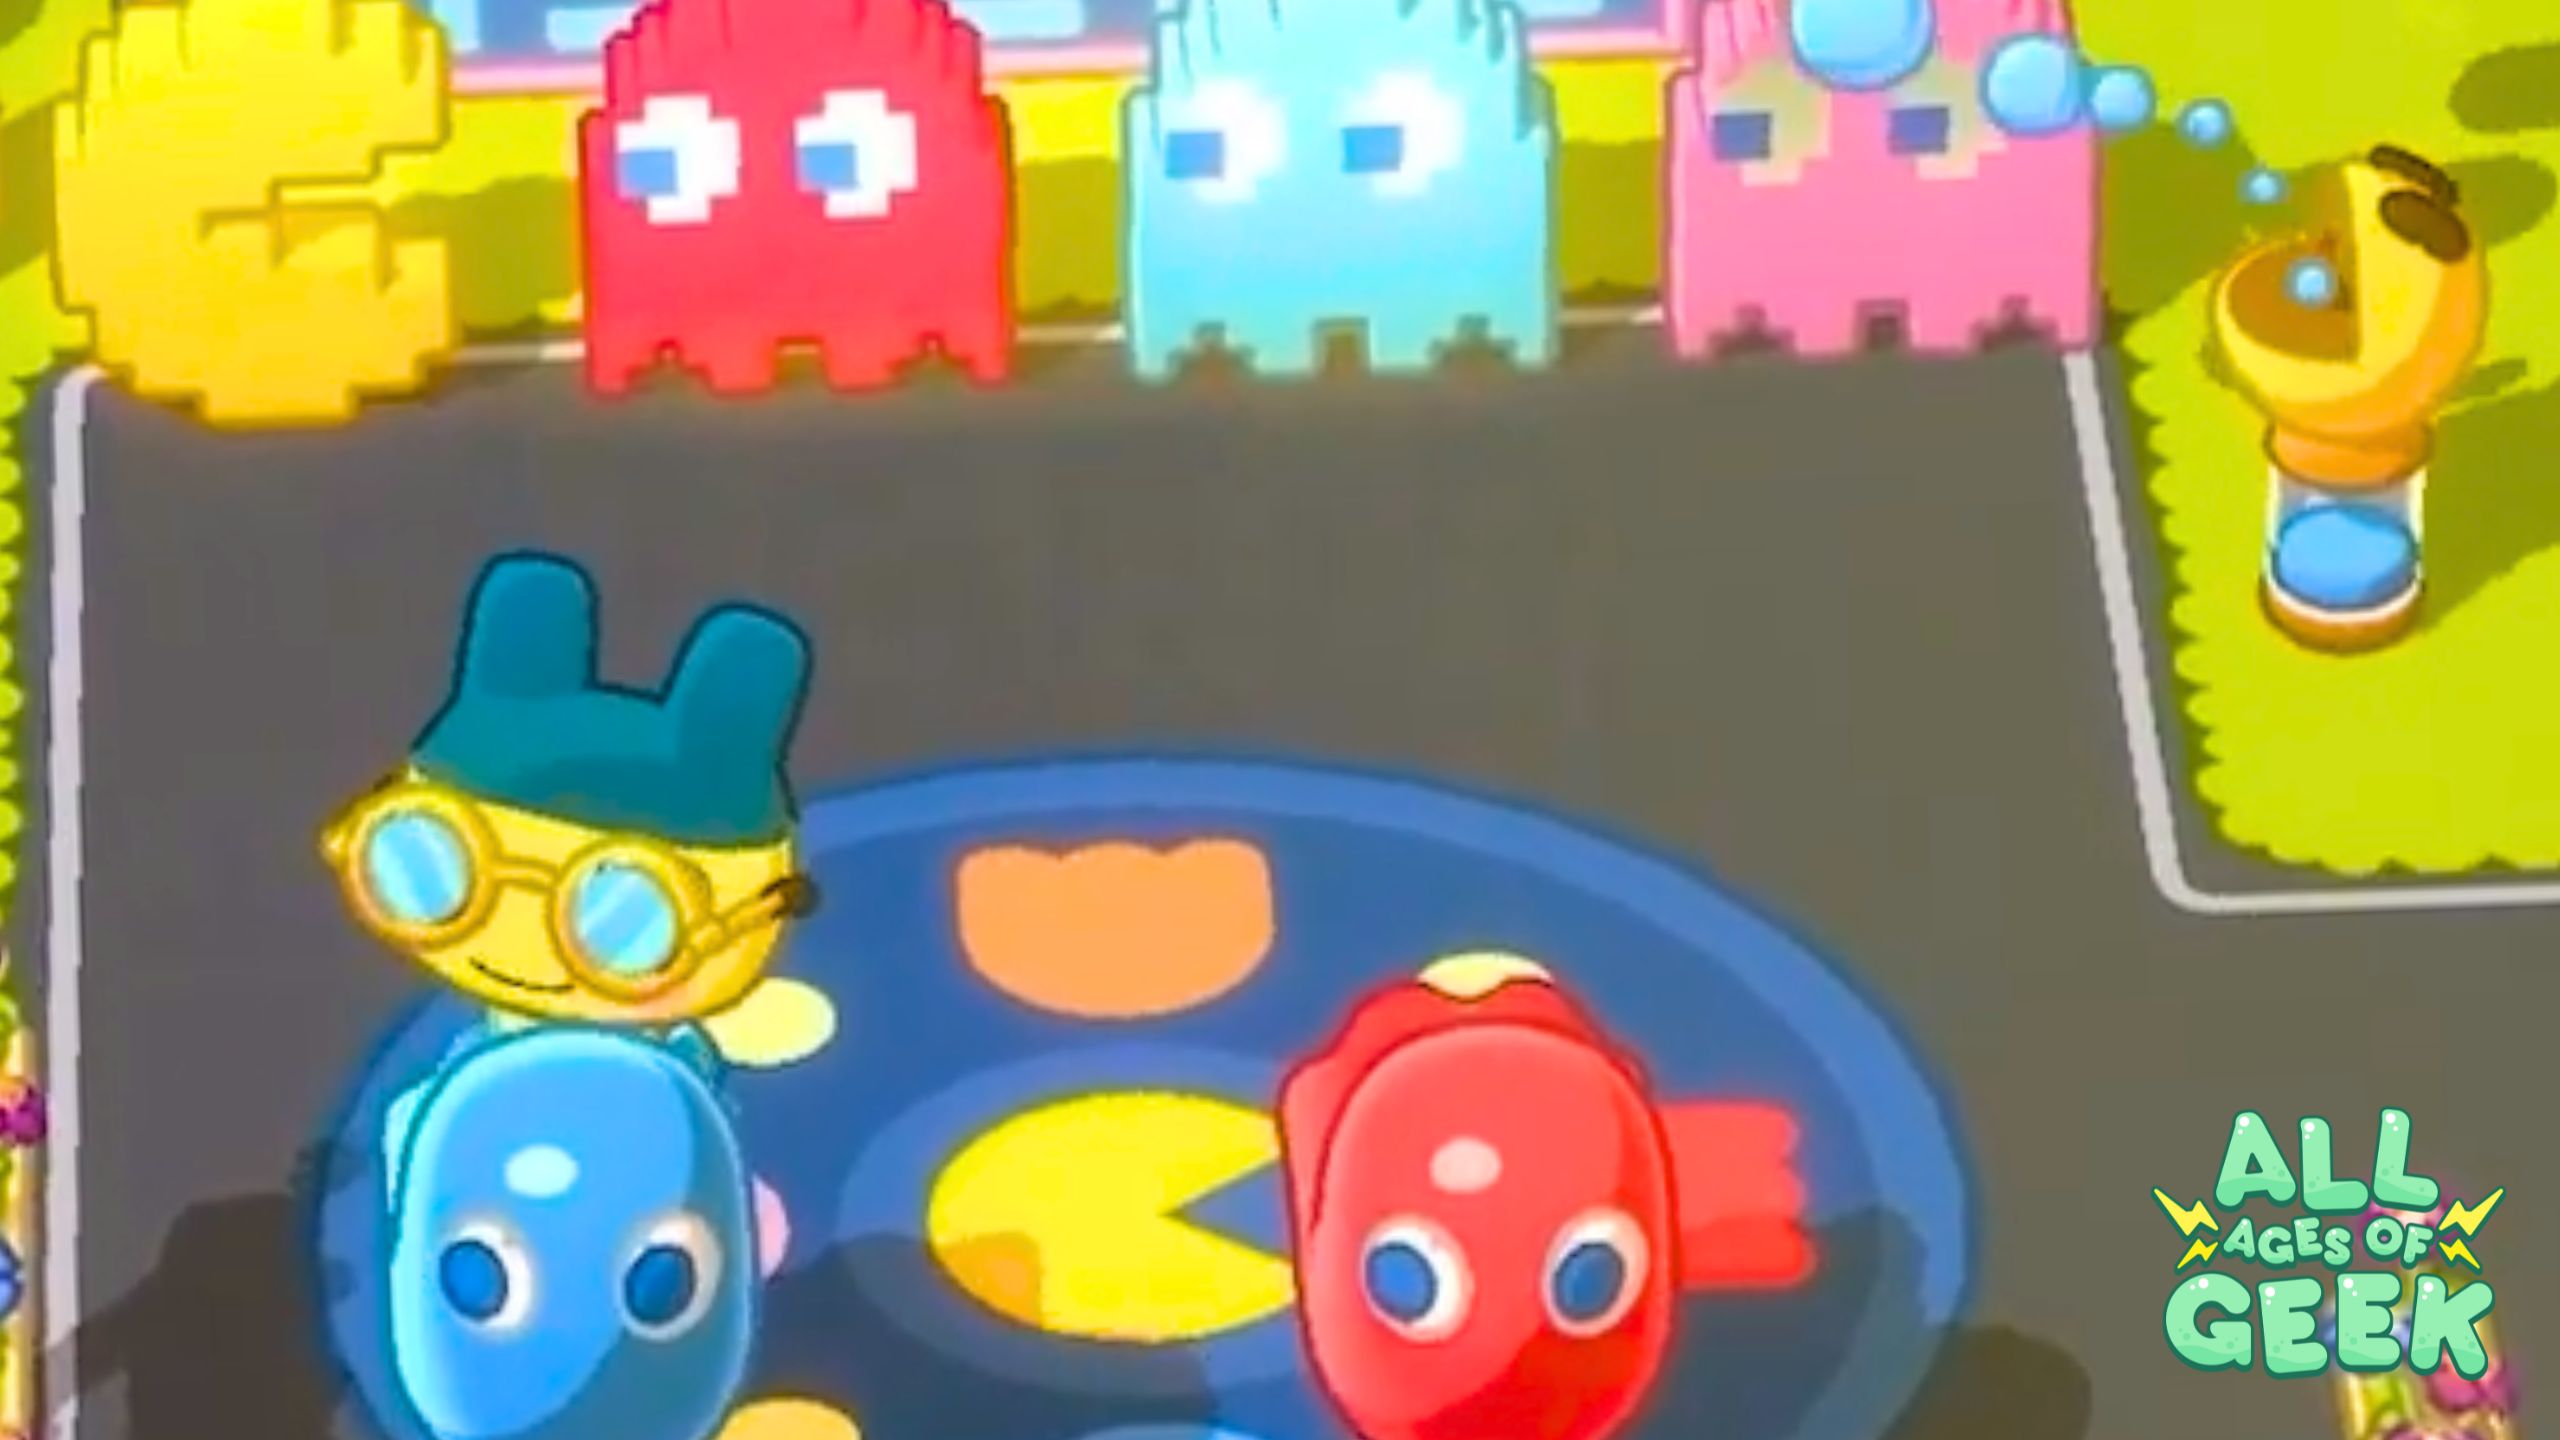 Tamagotchi characters enjoying the PAC-MAN crossover event in Tamagotchi Adventure Kingdom, featuring colorful PAC-MAN ghosts and a vibrant game area with the All Ages of Geek logo in the corner.